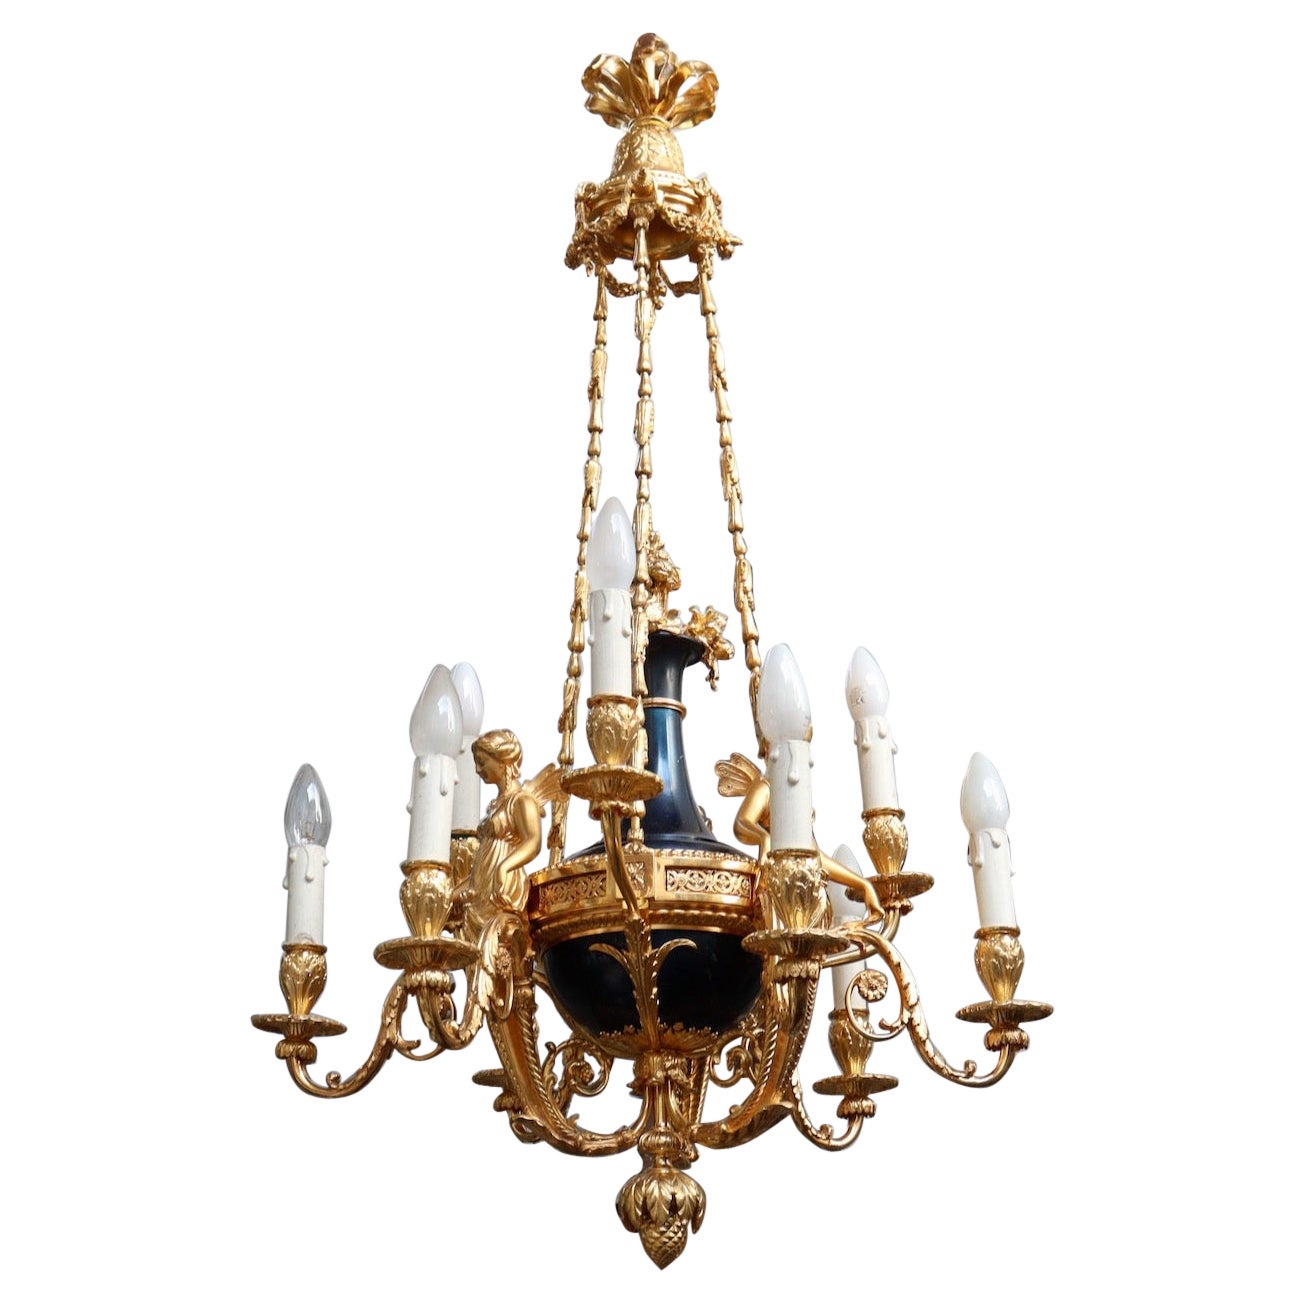 A very fine French Ormolu and patinated metal nine-lights figural chandelier 